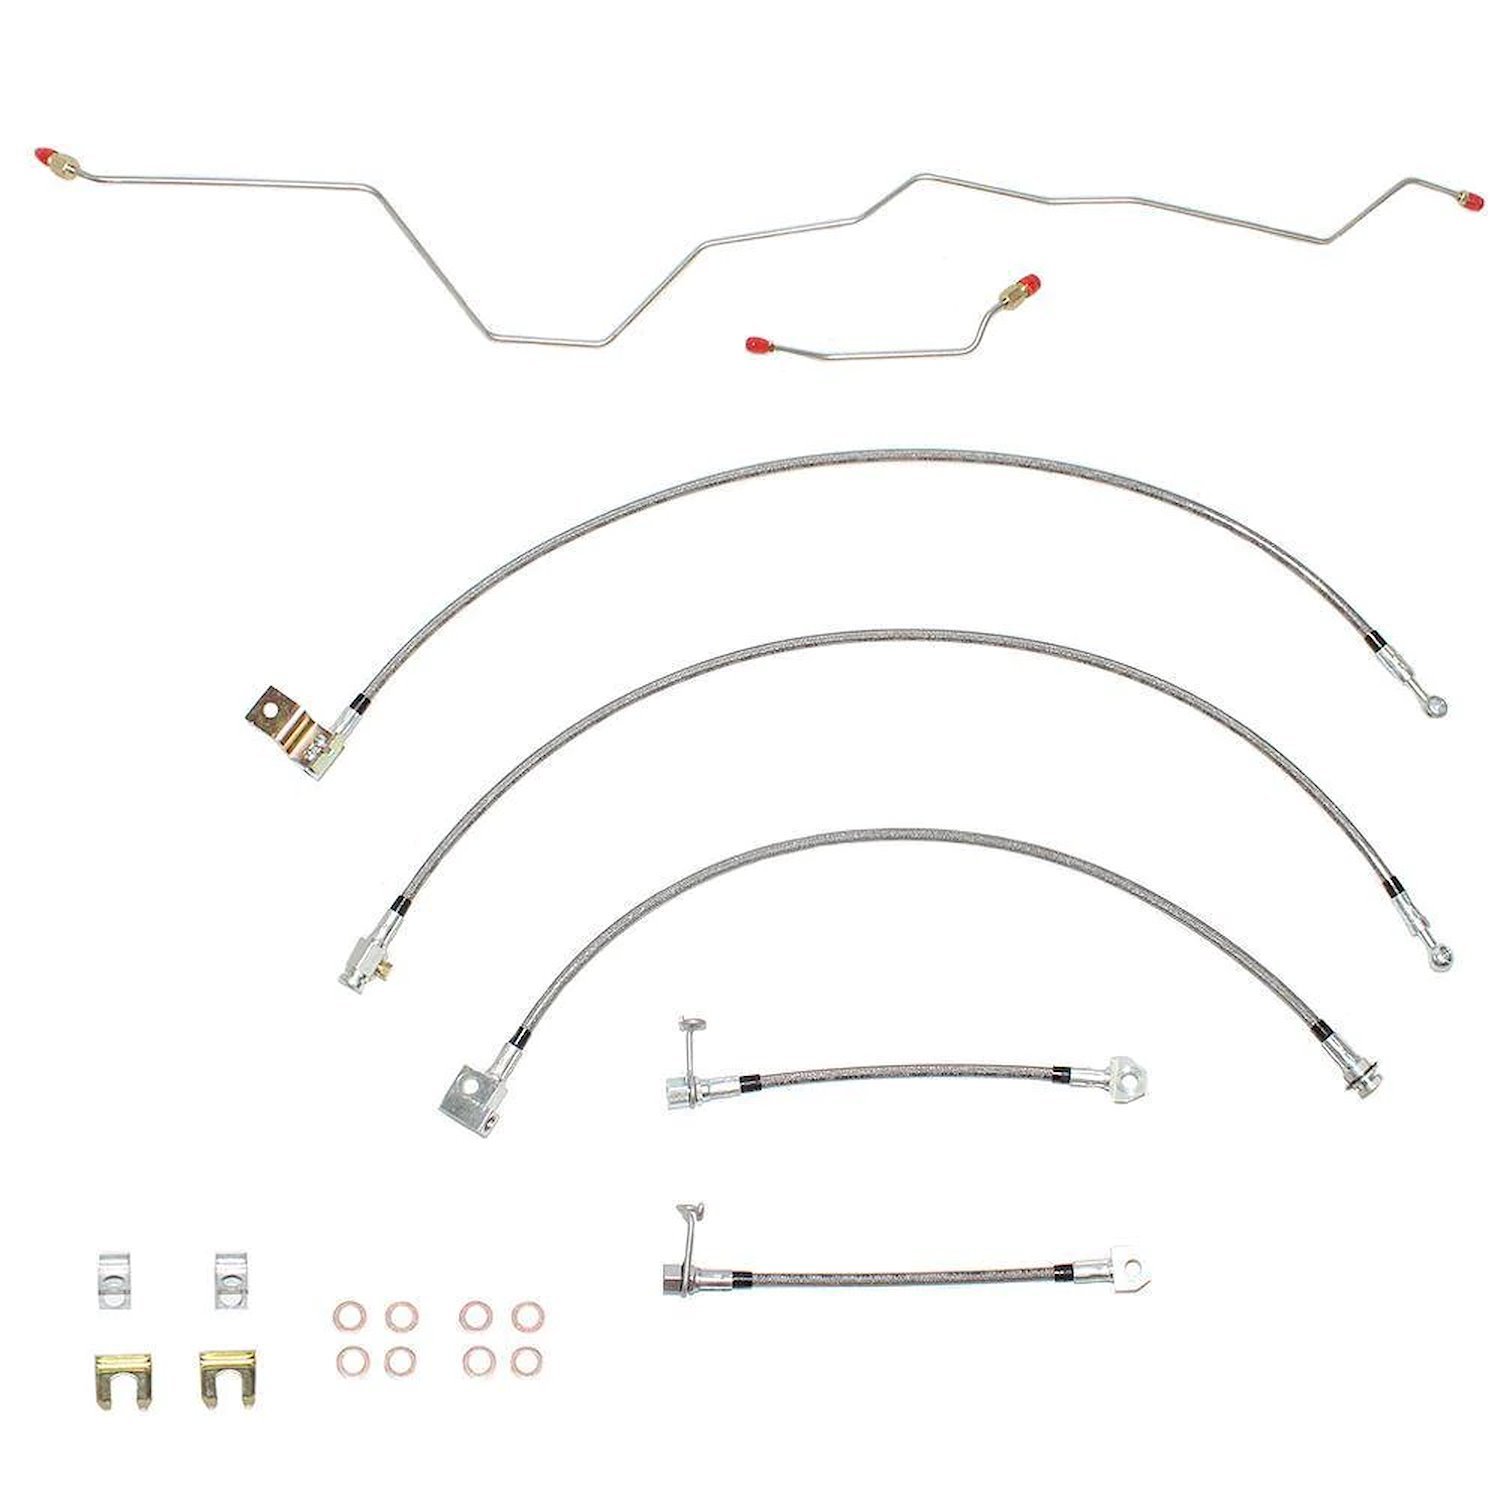 Complete Brake Hose Kit 2001-2002 Dodge Ram 2500/3500 4wd w/Rear Disc/Manual Trans [Braided Stainless]